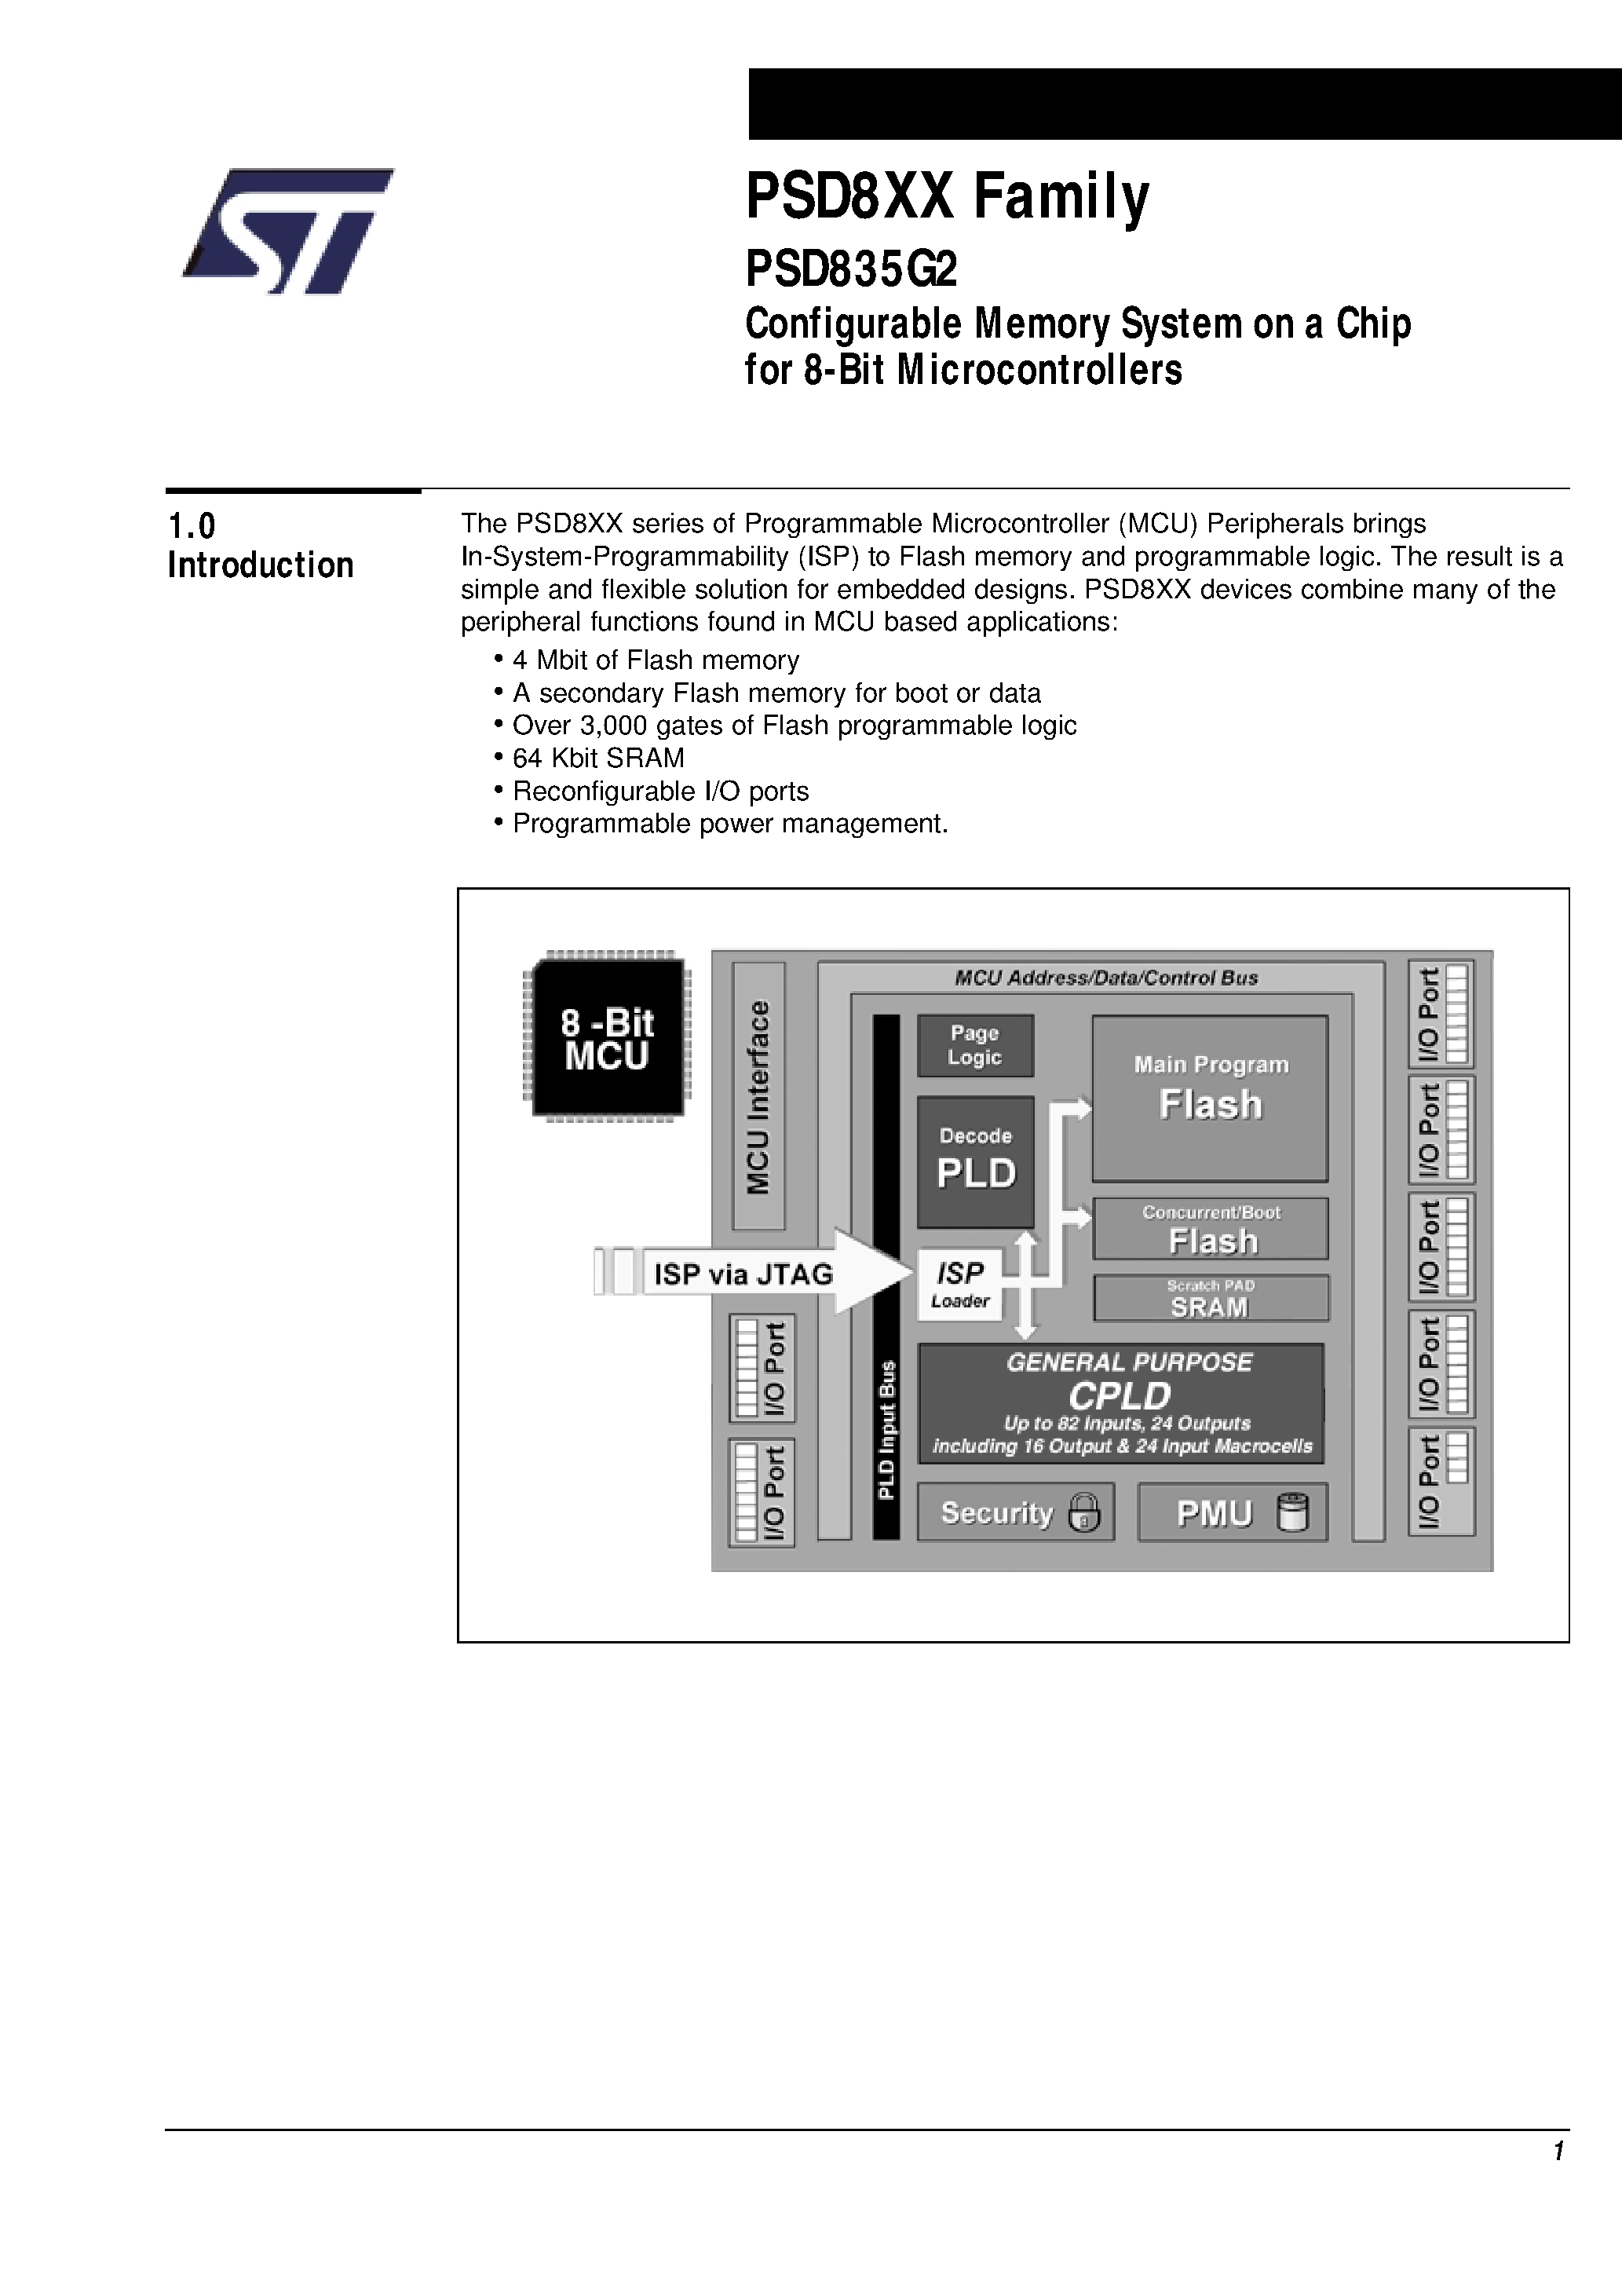 Datasheet PSD835F2-A-20UI - Configurable Memory System on a Chip for 8-Bit Microcontrollers page 2